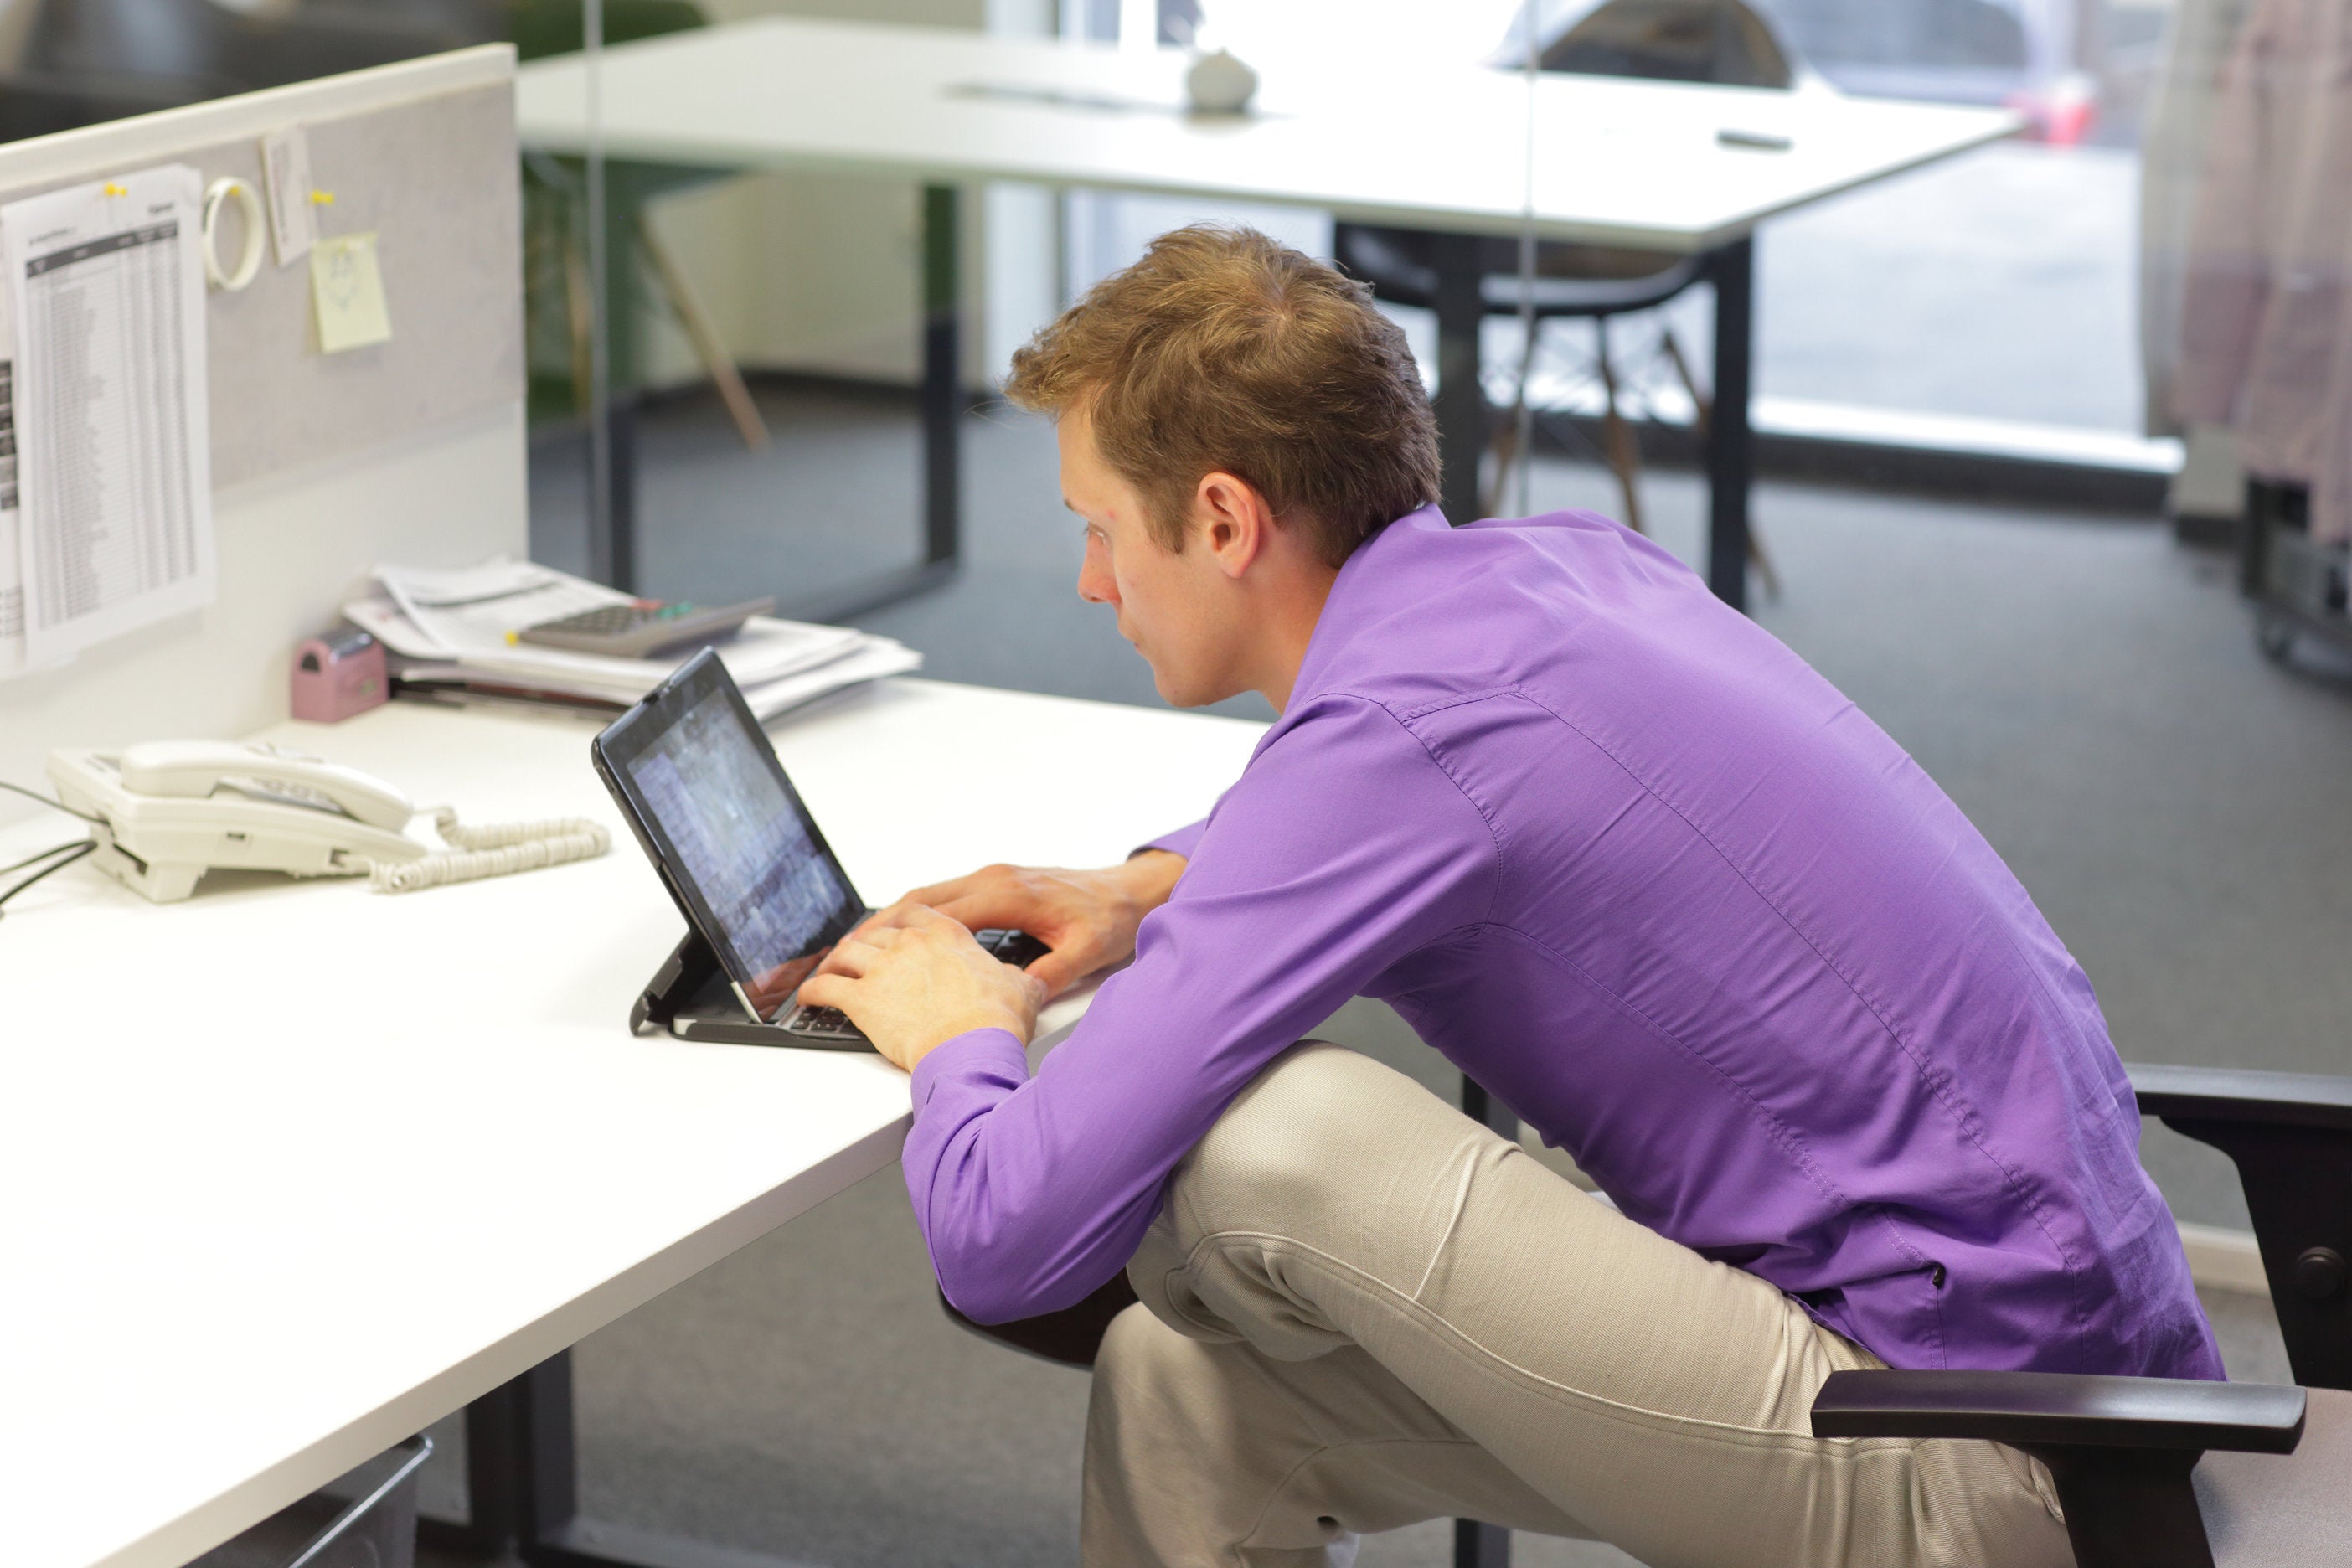 7 Stretches You Can Do From Your Desk Chair, Orthopedic Blog